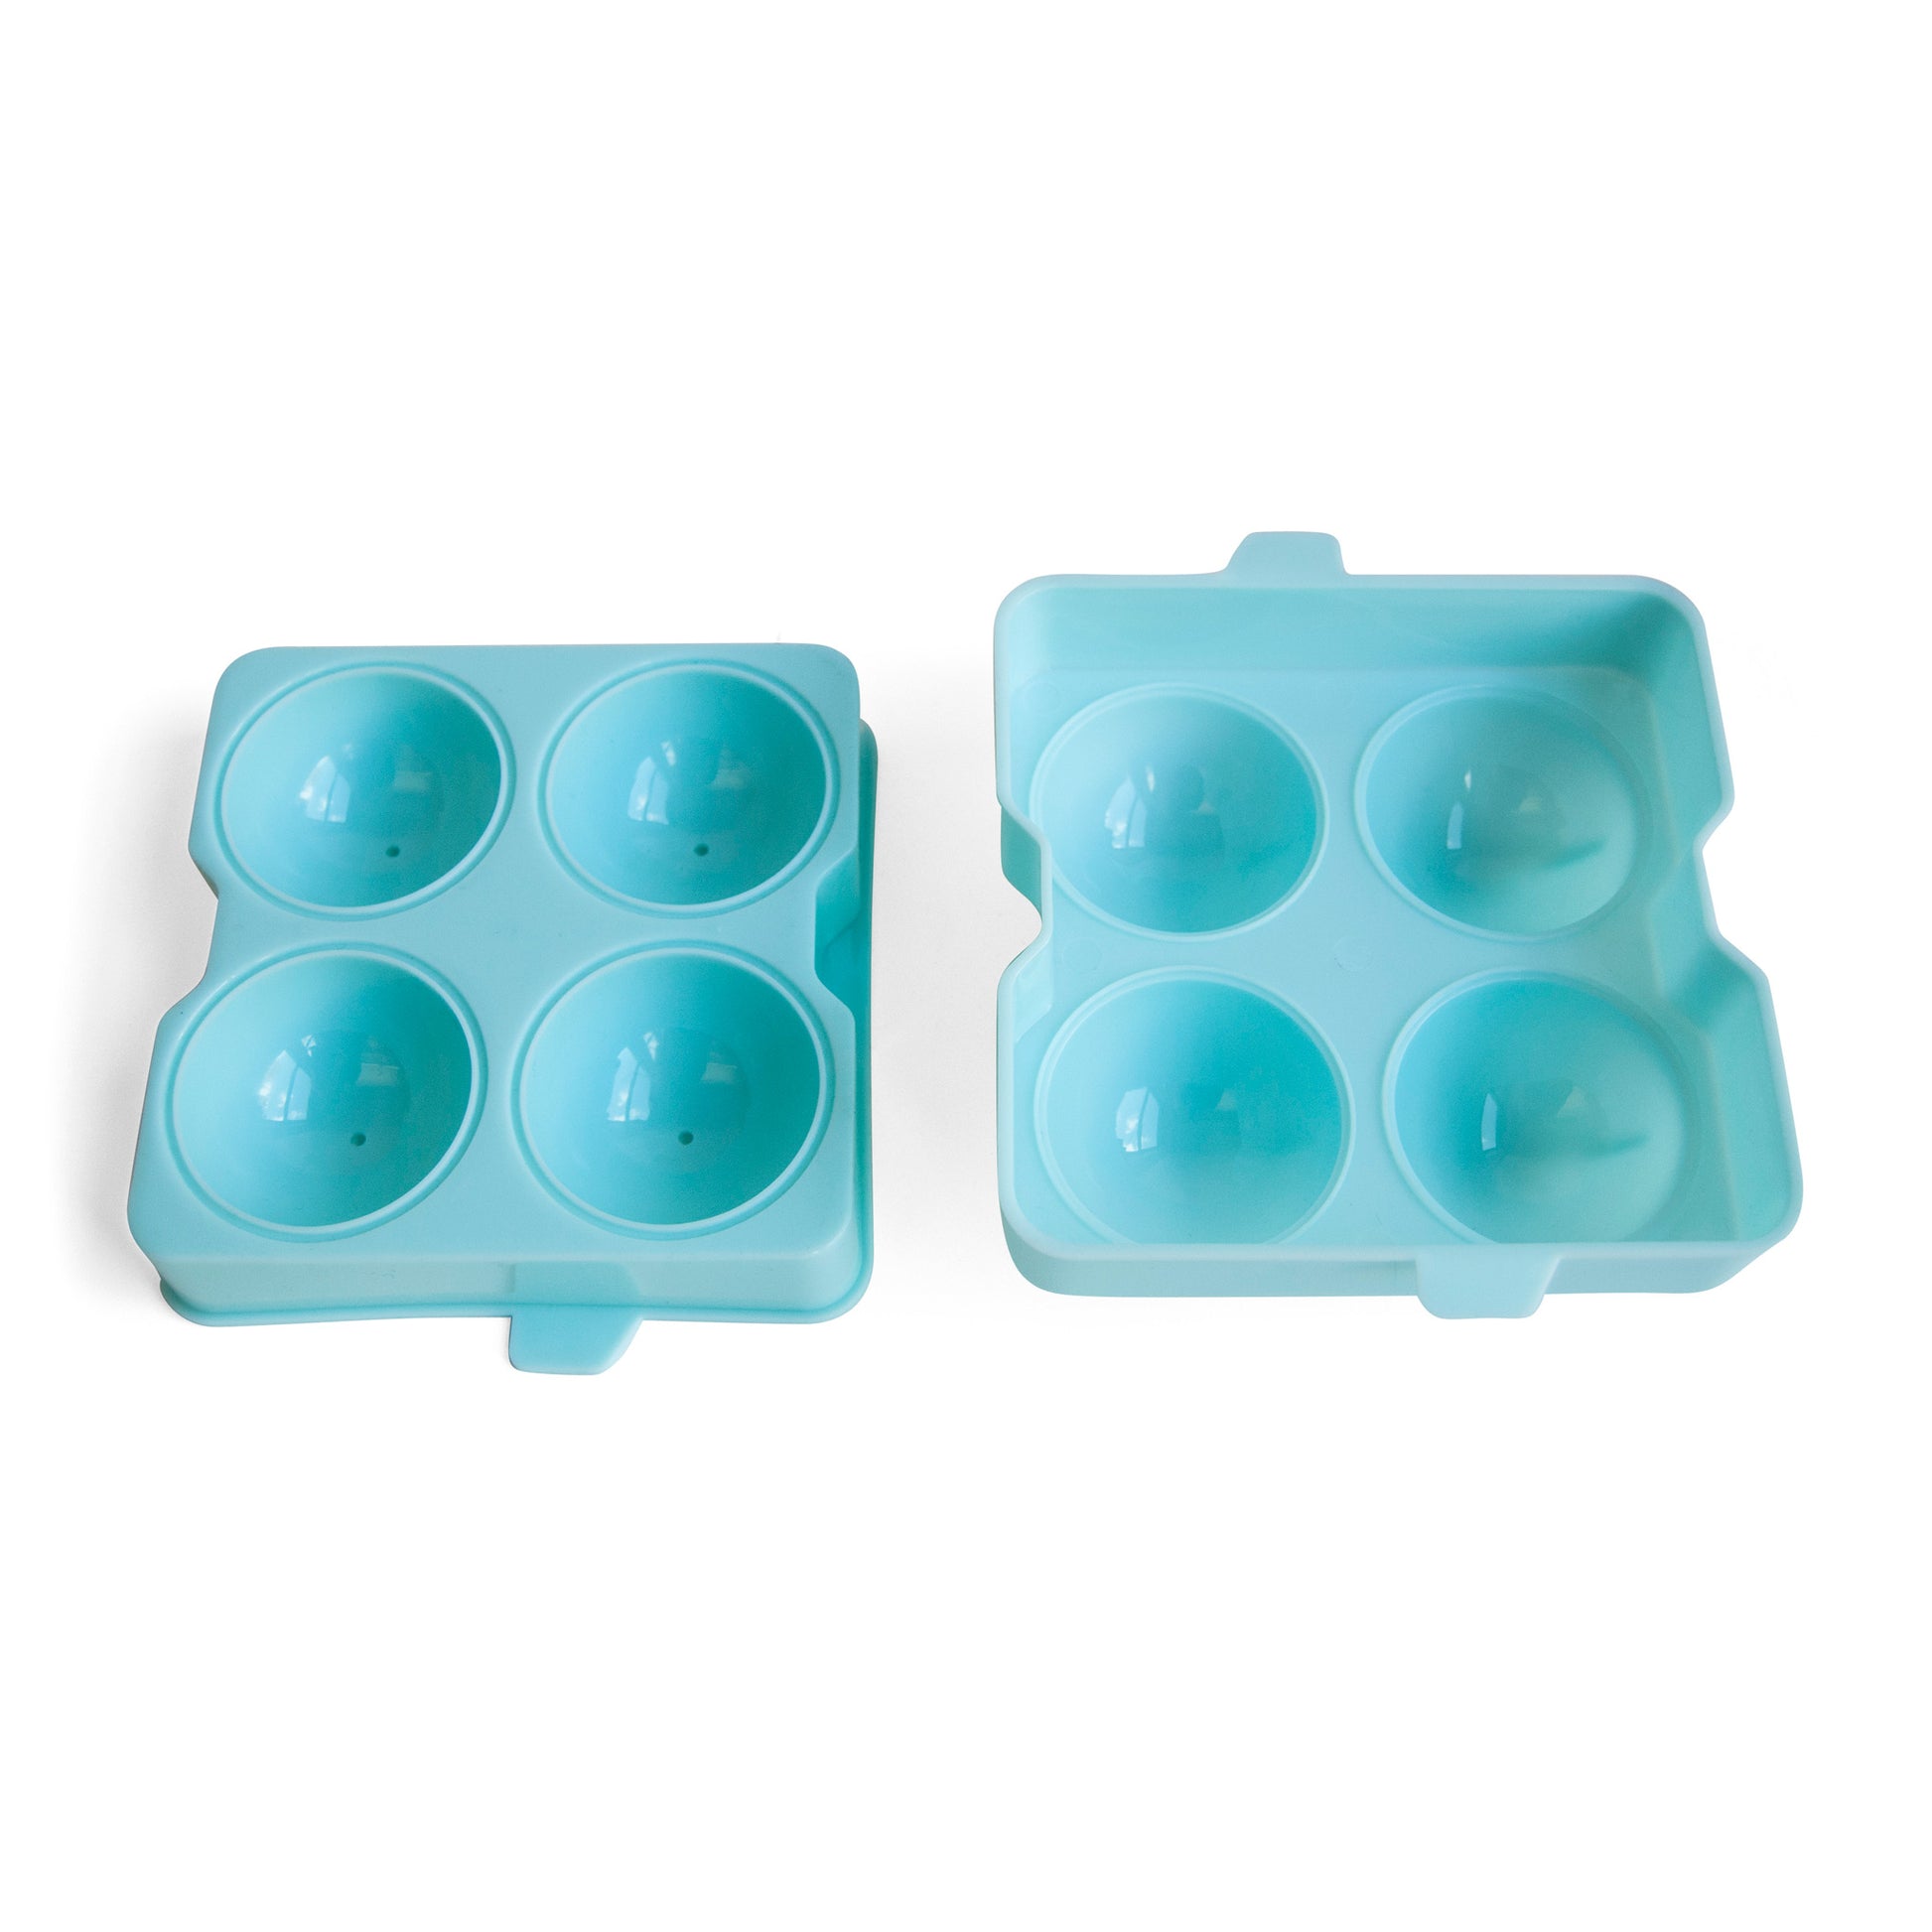 2.5in SQUARE ICE CUBE TRAY – FOOD GRADE RUBBER / GREY